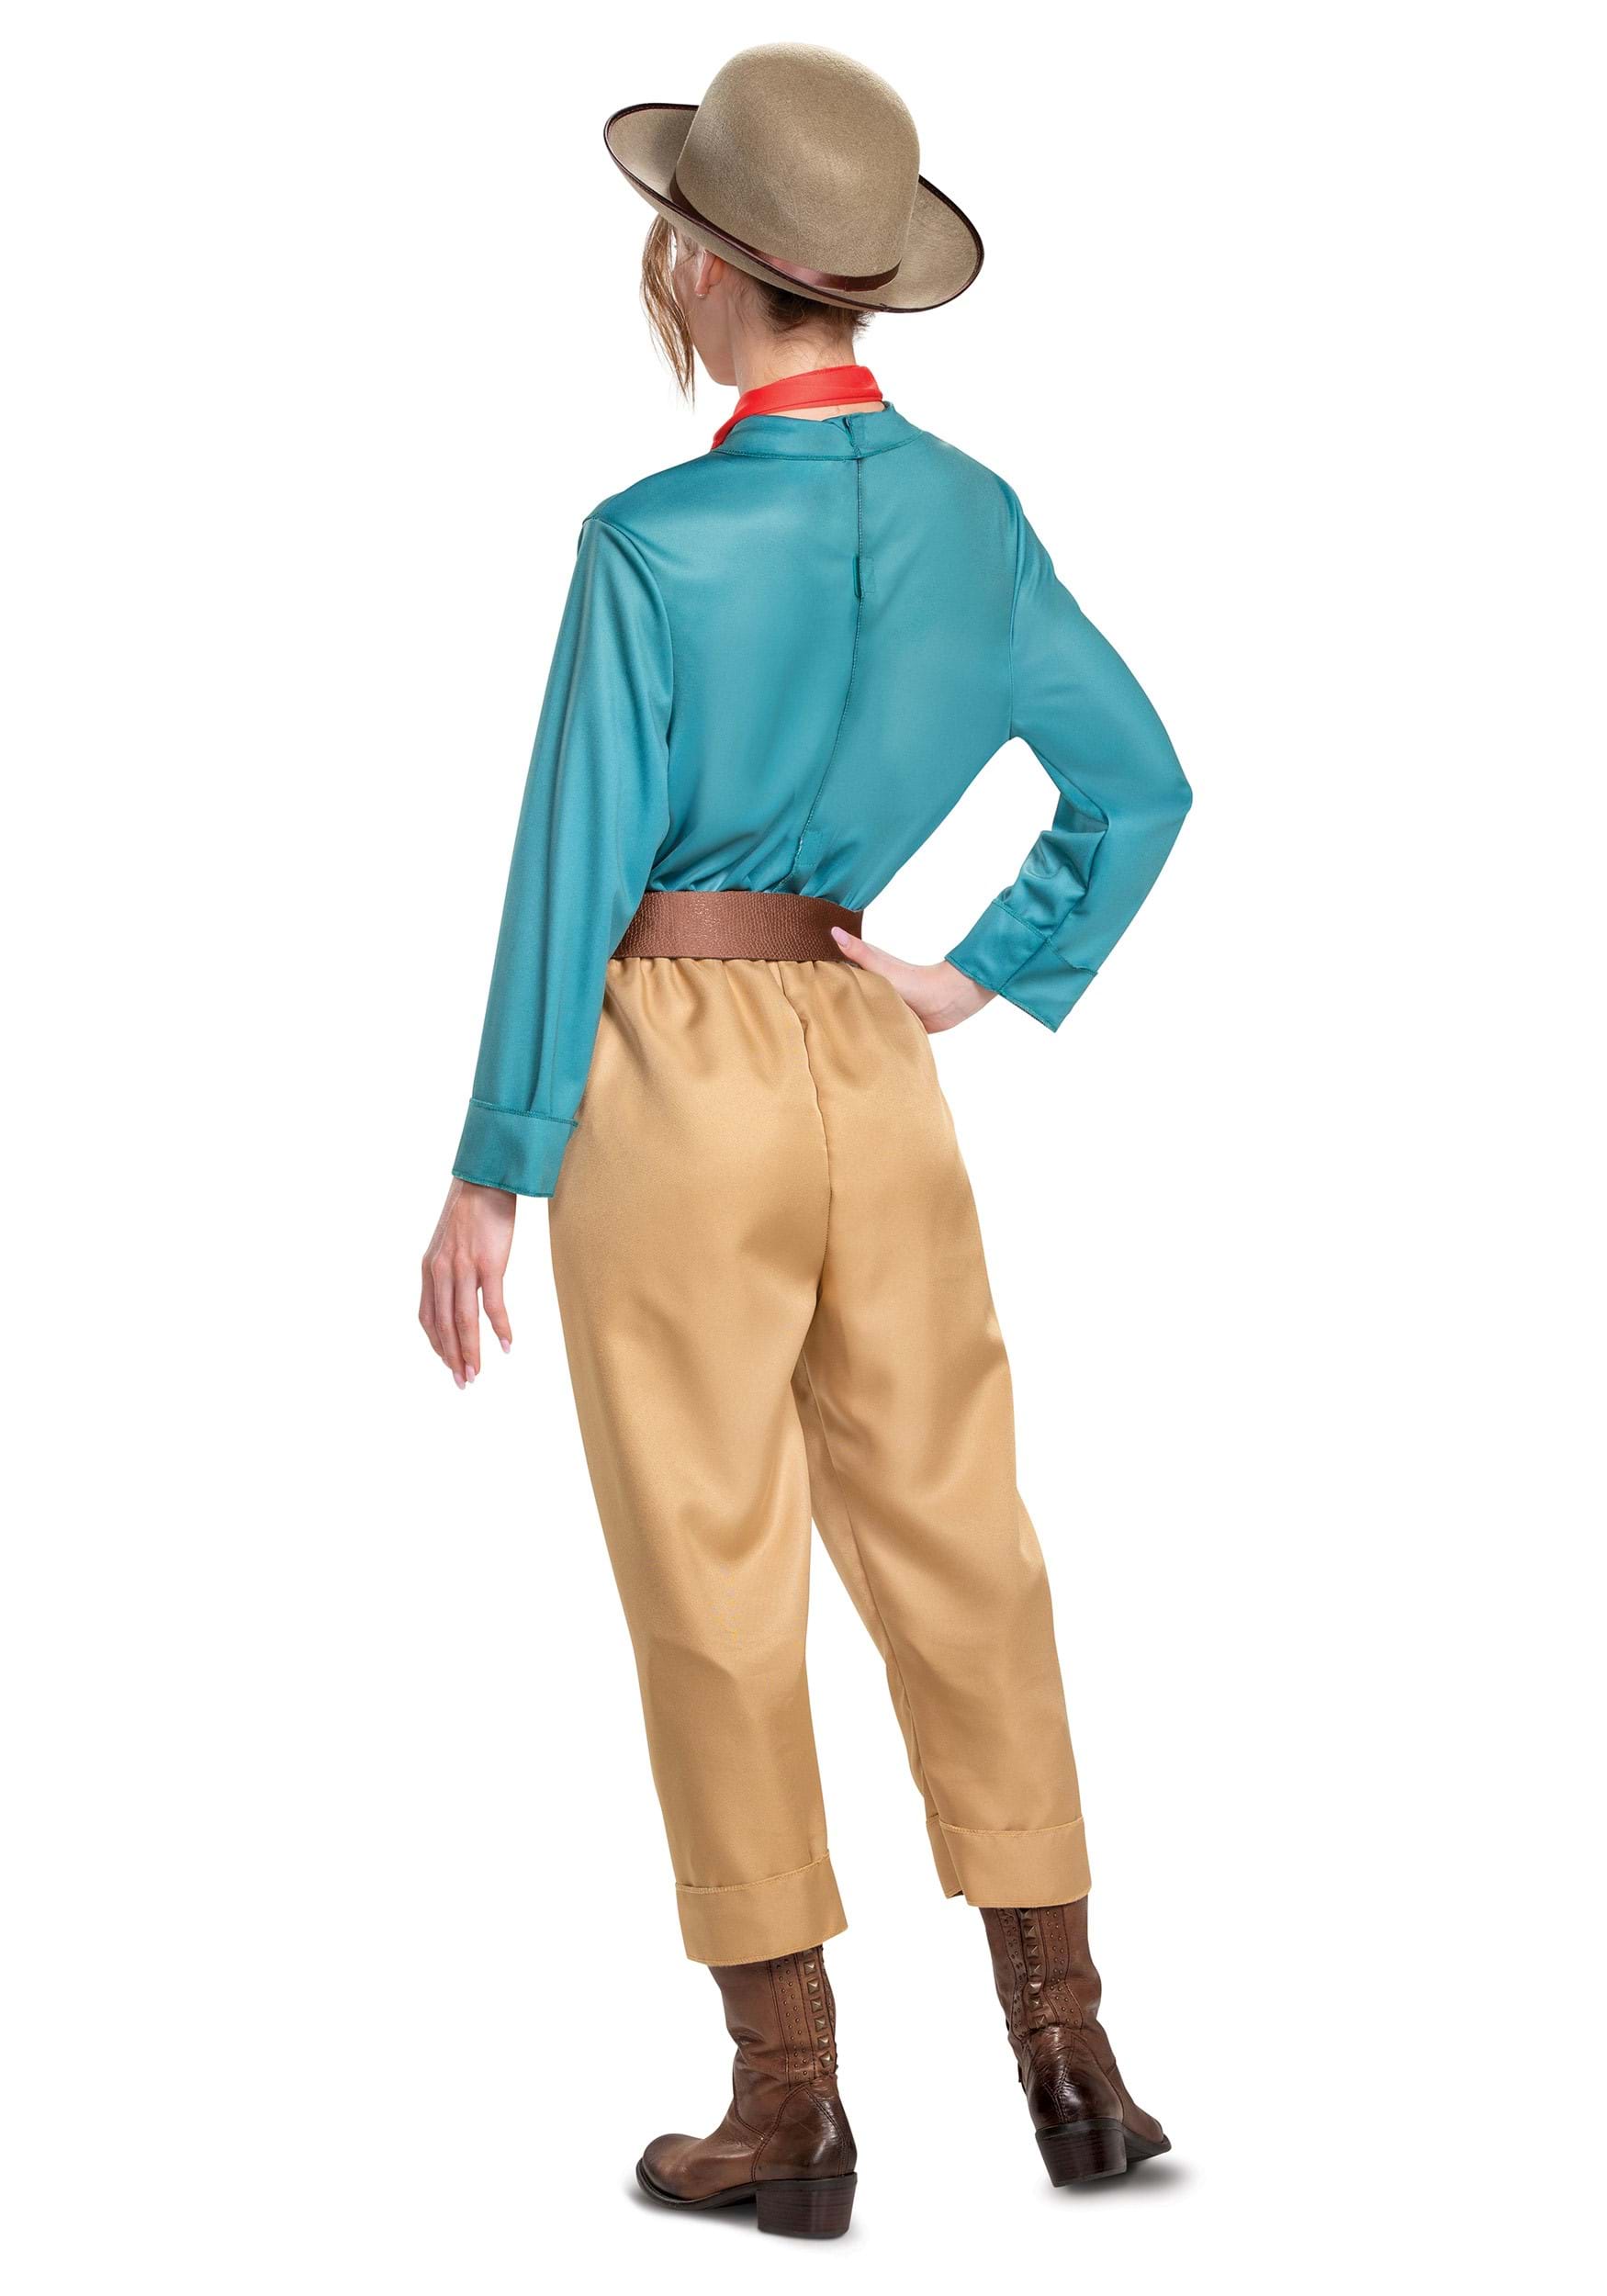 Women's Jungle Cruise Deluxe Lily Costume